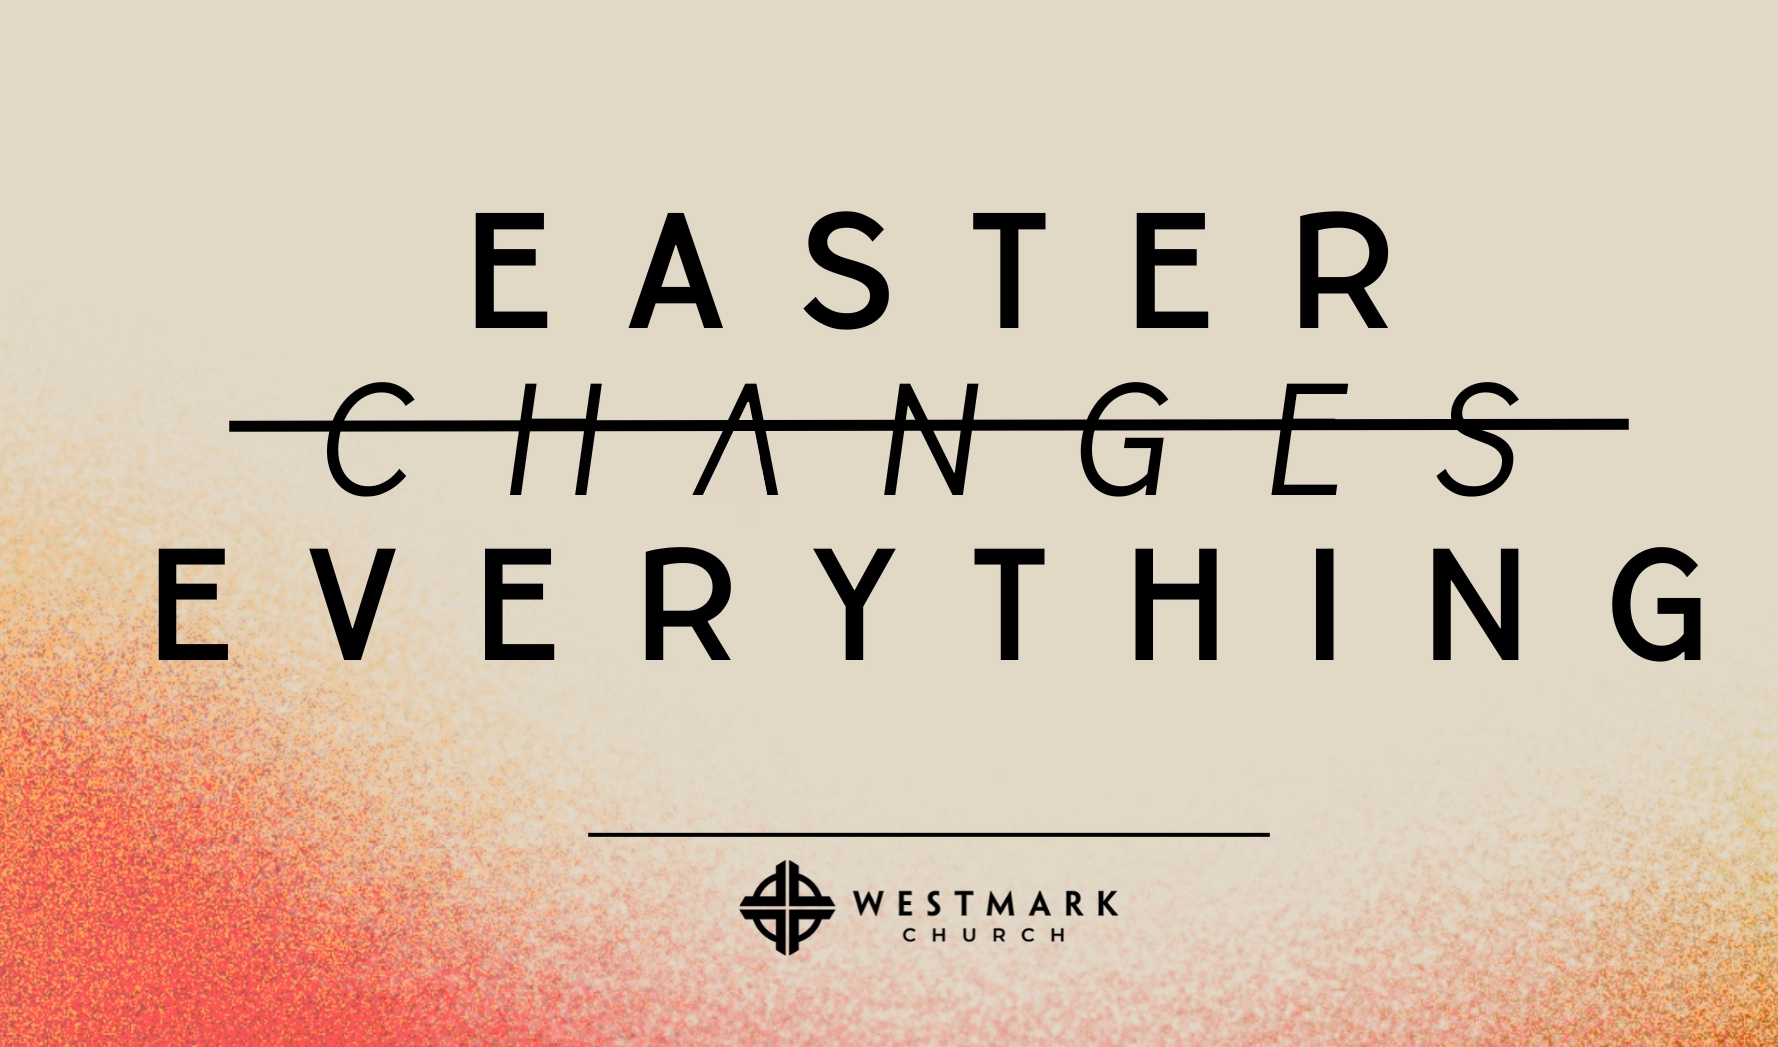 310177810471706-easter-changes-everything-17132243236153.png